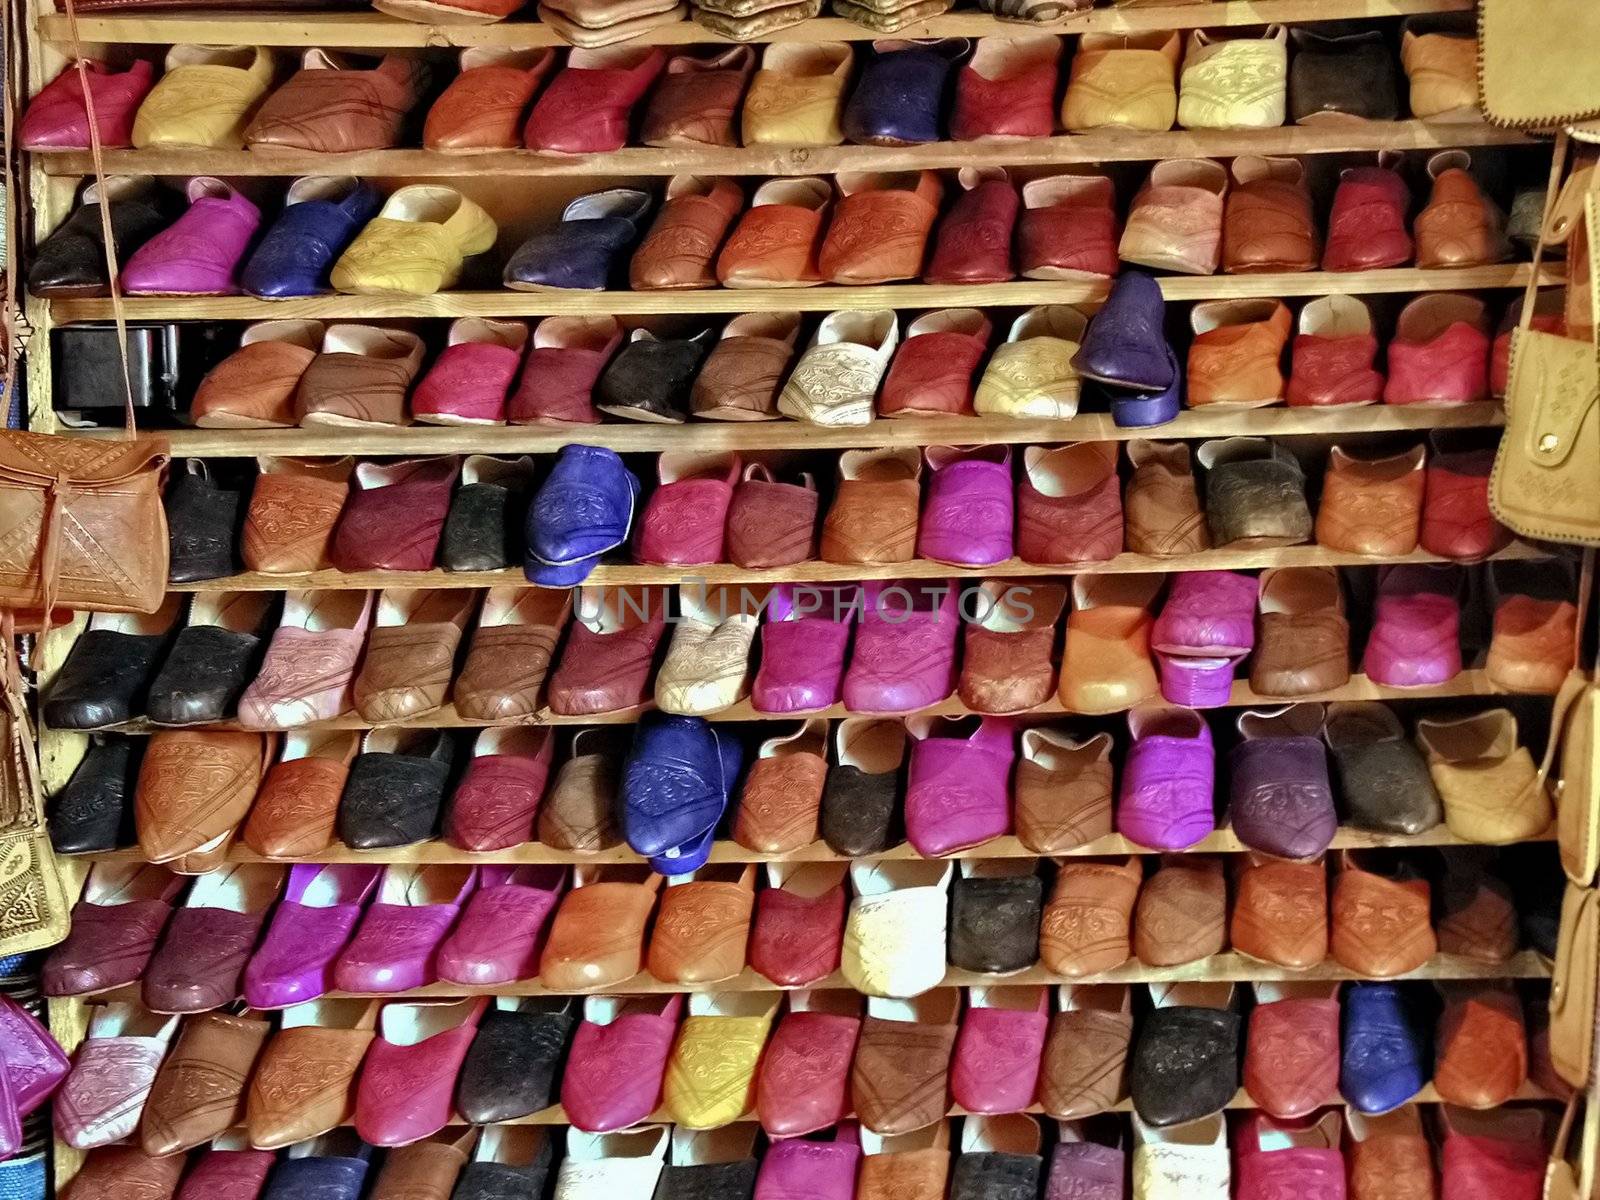 Colorful shoes for sale in Marrakech Morocco